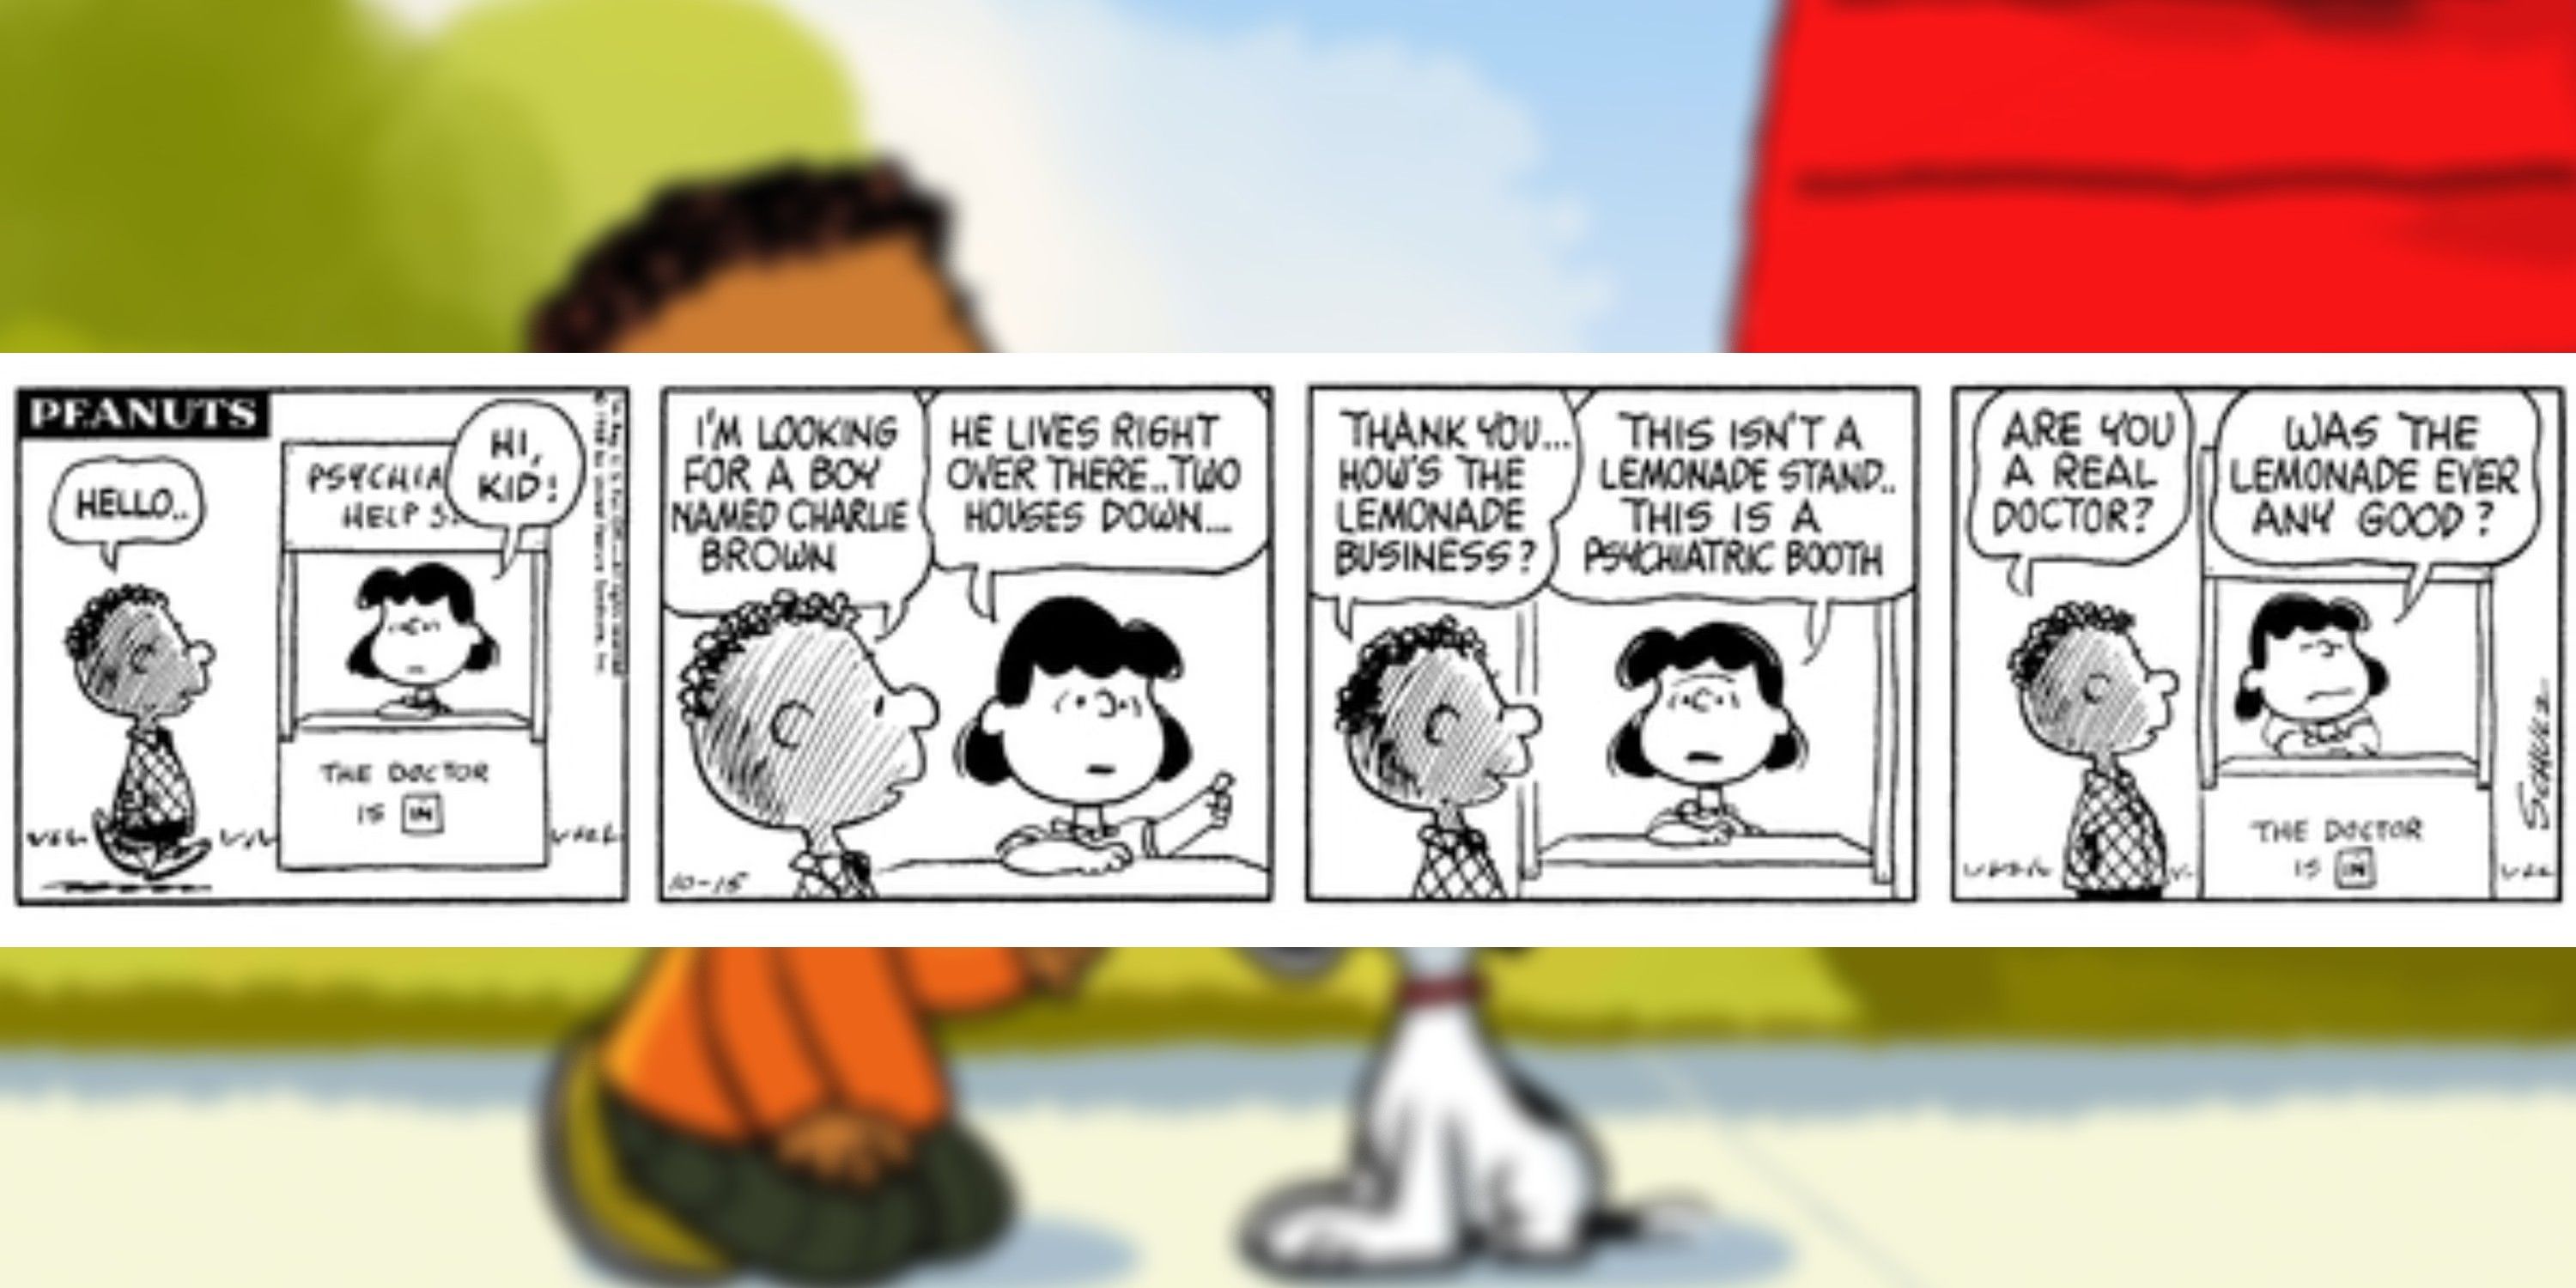 peanuts franklin challenges lucy over her psychiatry booth